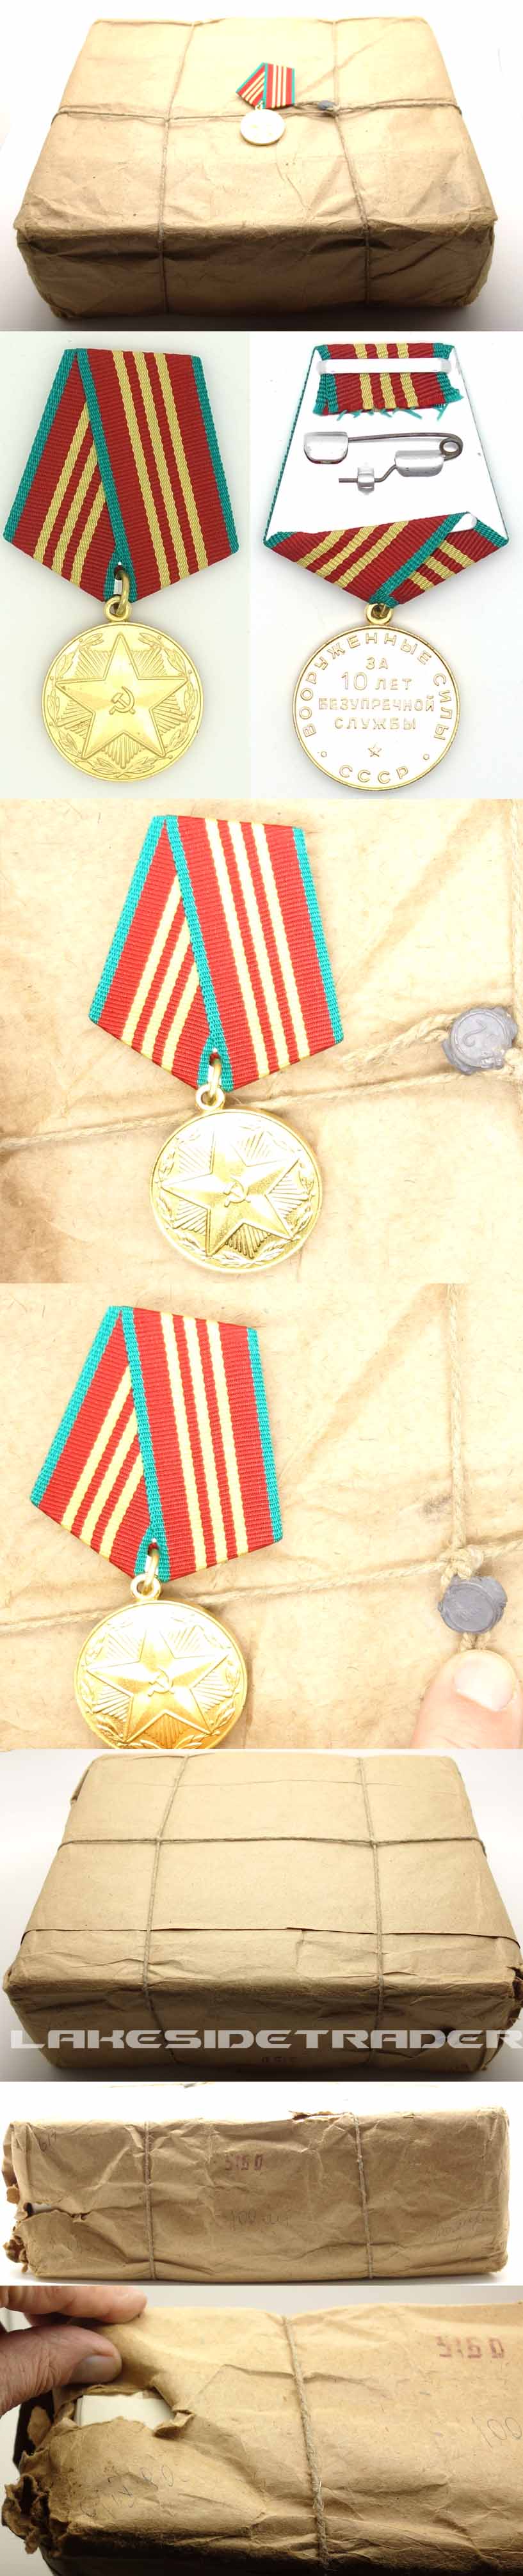 100 Soviet 10 Year Service Awards in Issue Cases